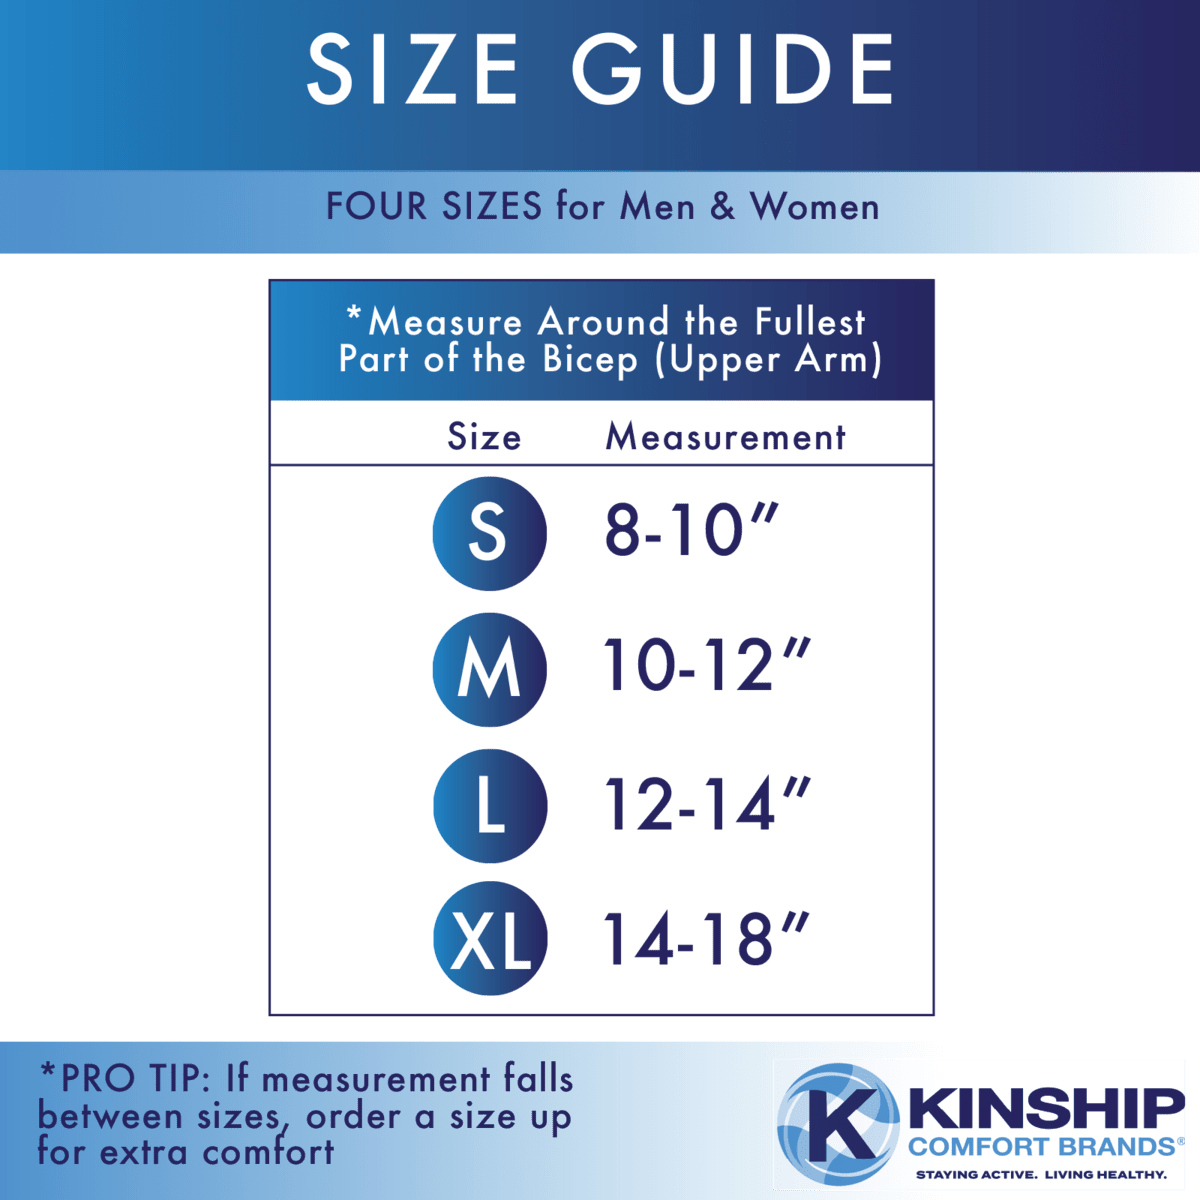 Find your size with our simple Size Guide